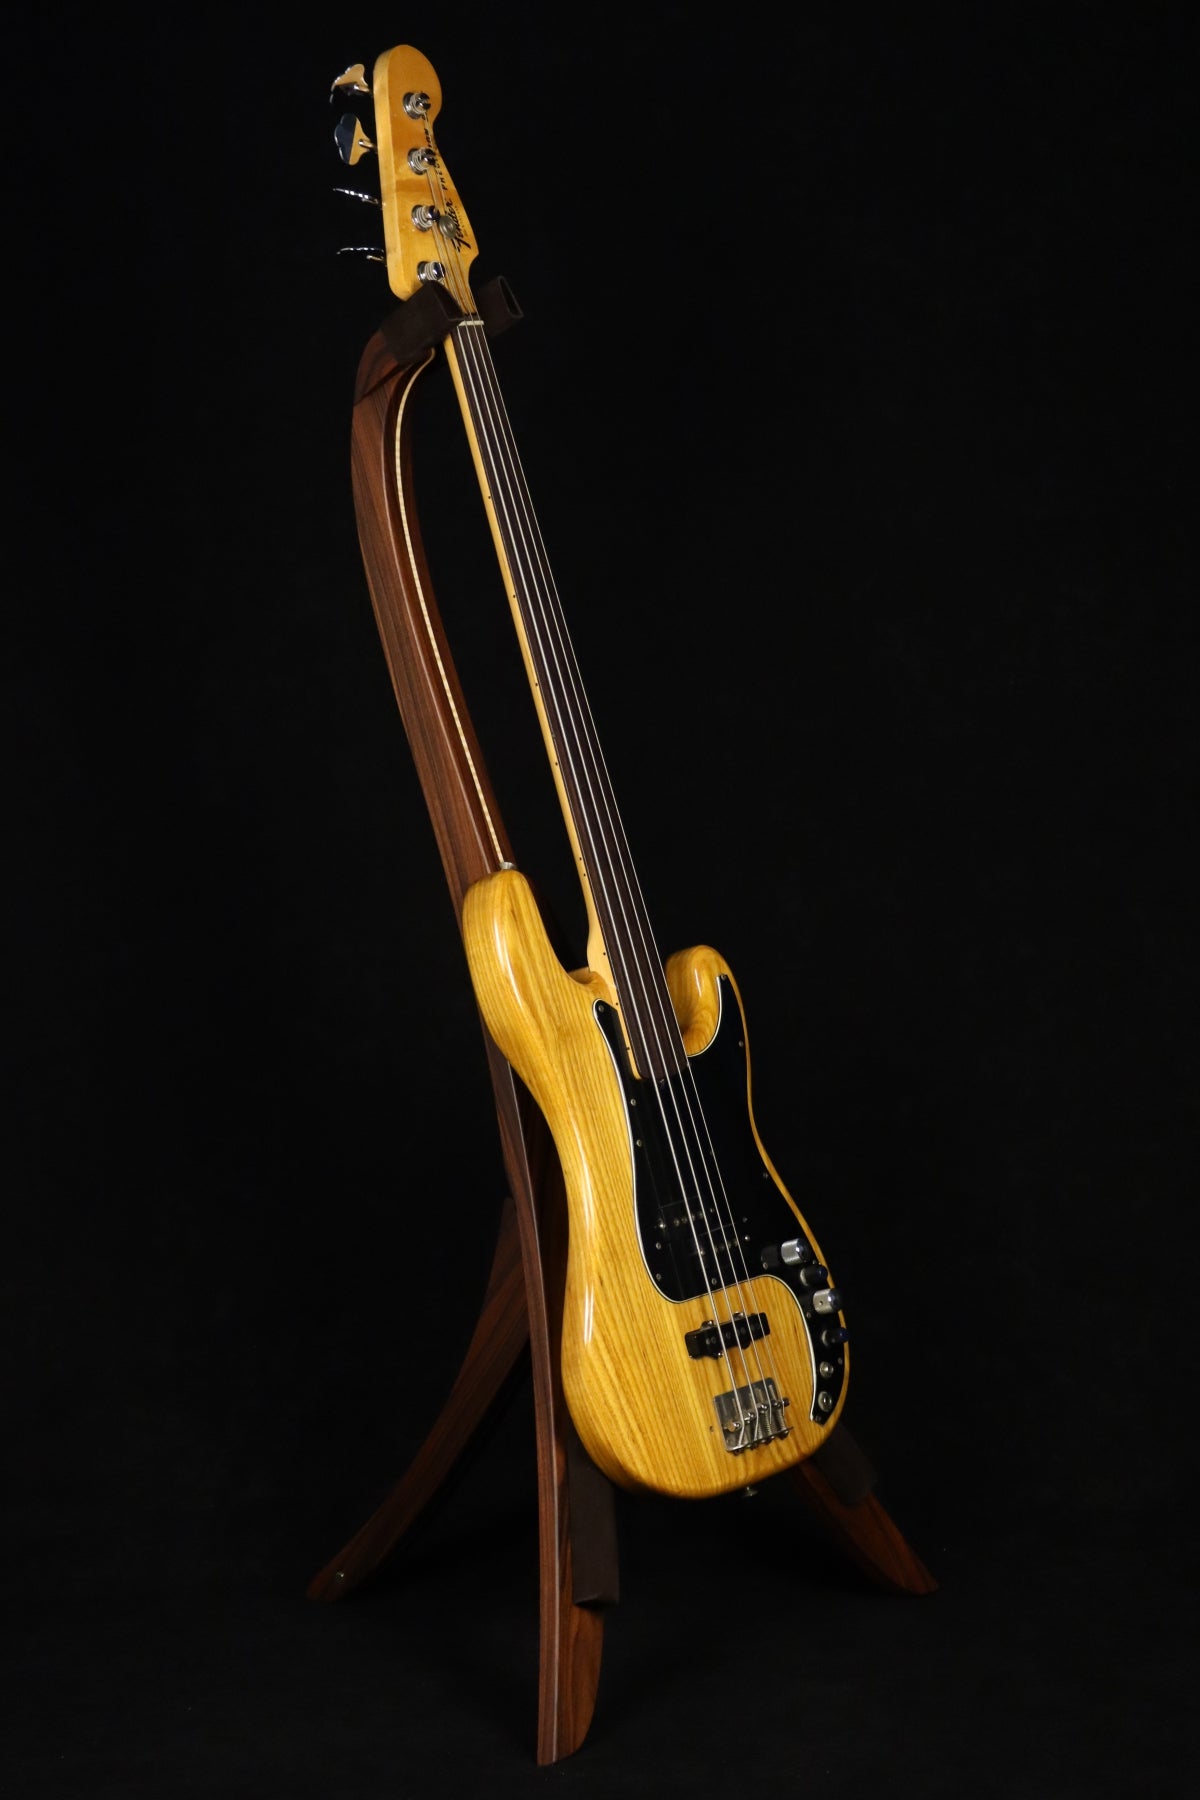 Folding morado Bolivian rosewood and curly maple wood electric bass guitar floor stand full front image with Fender 4 string fretless bass